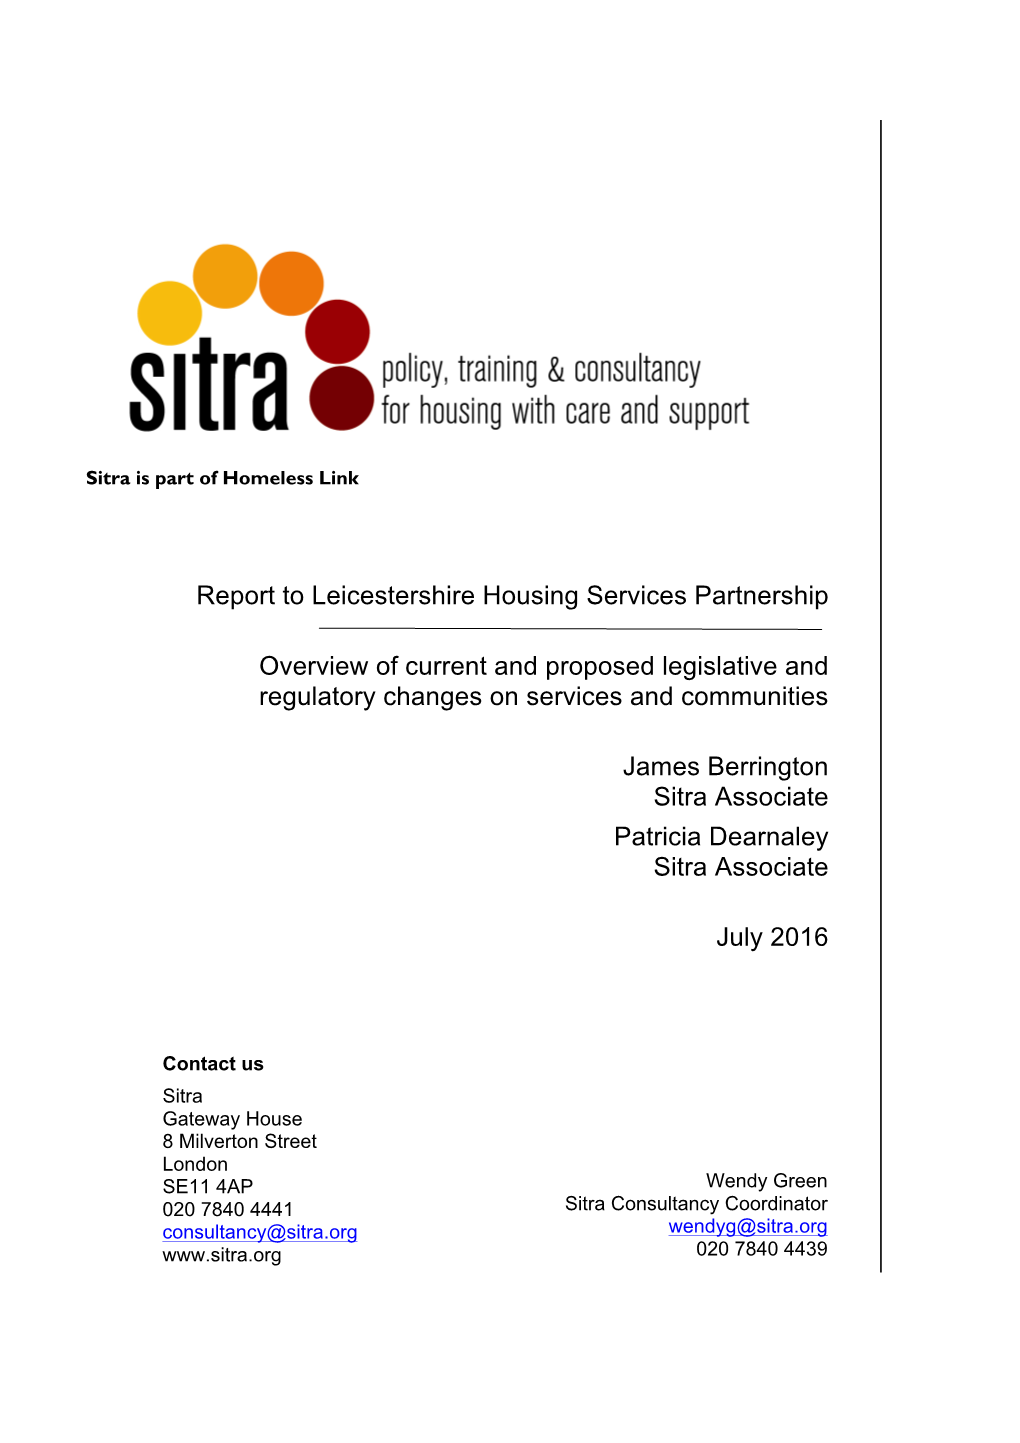 Report to Leicestershire Housing Services Partnership Overview Of